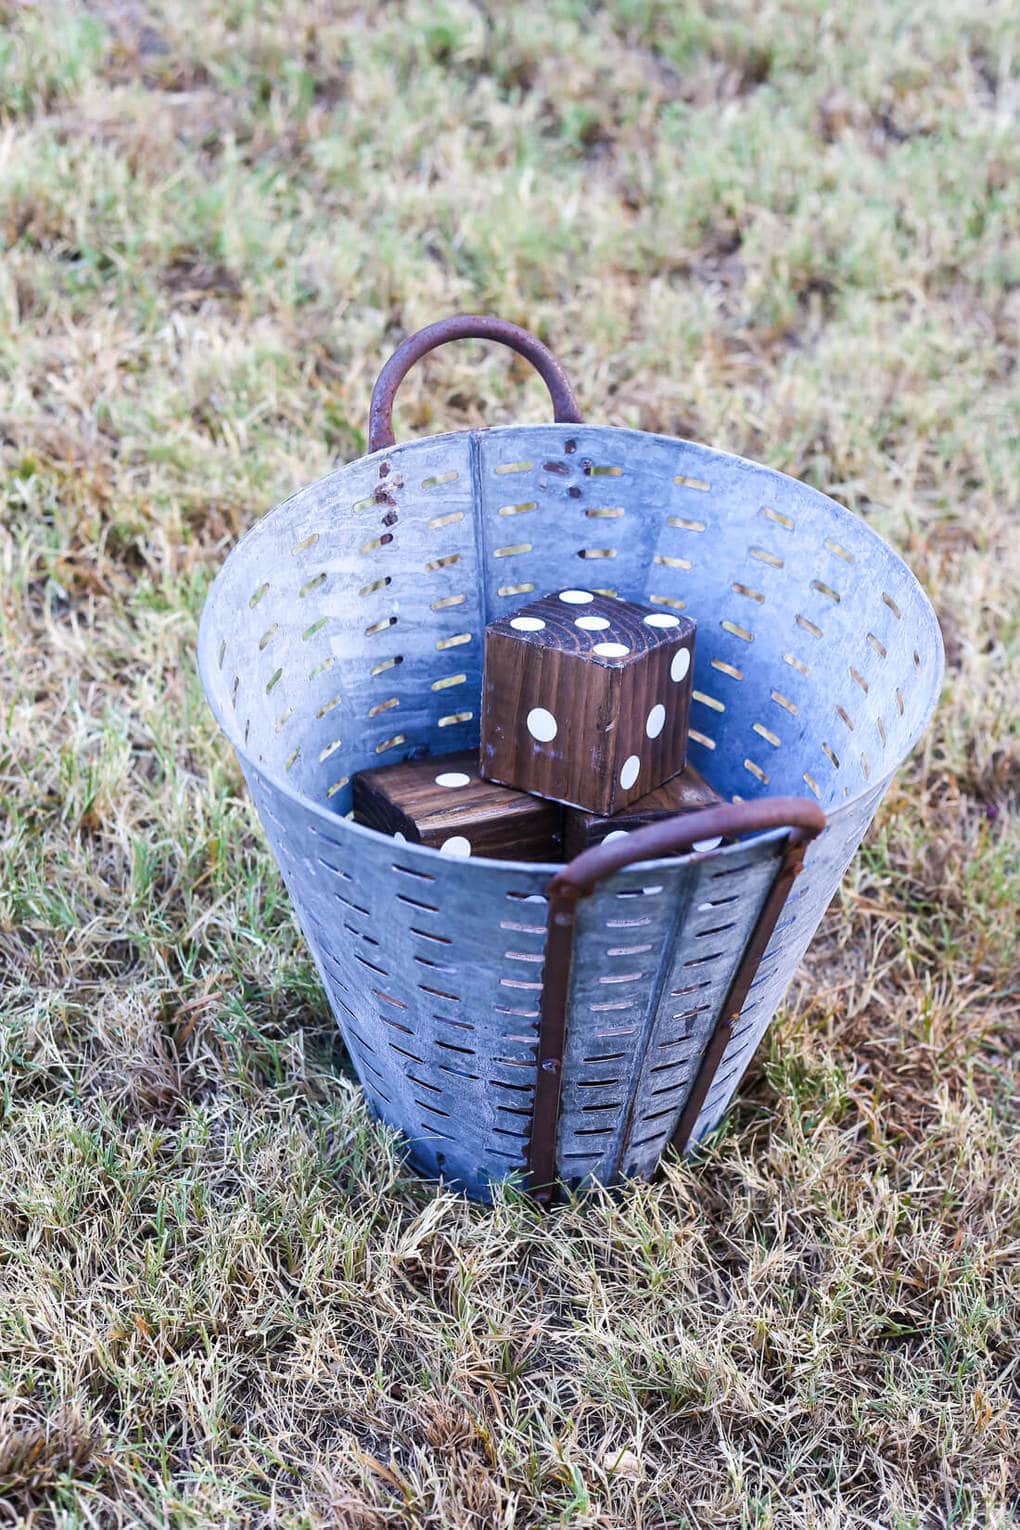 Wooden yard dice in an olive bucket